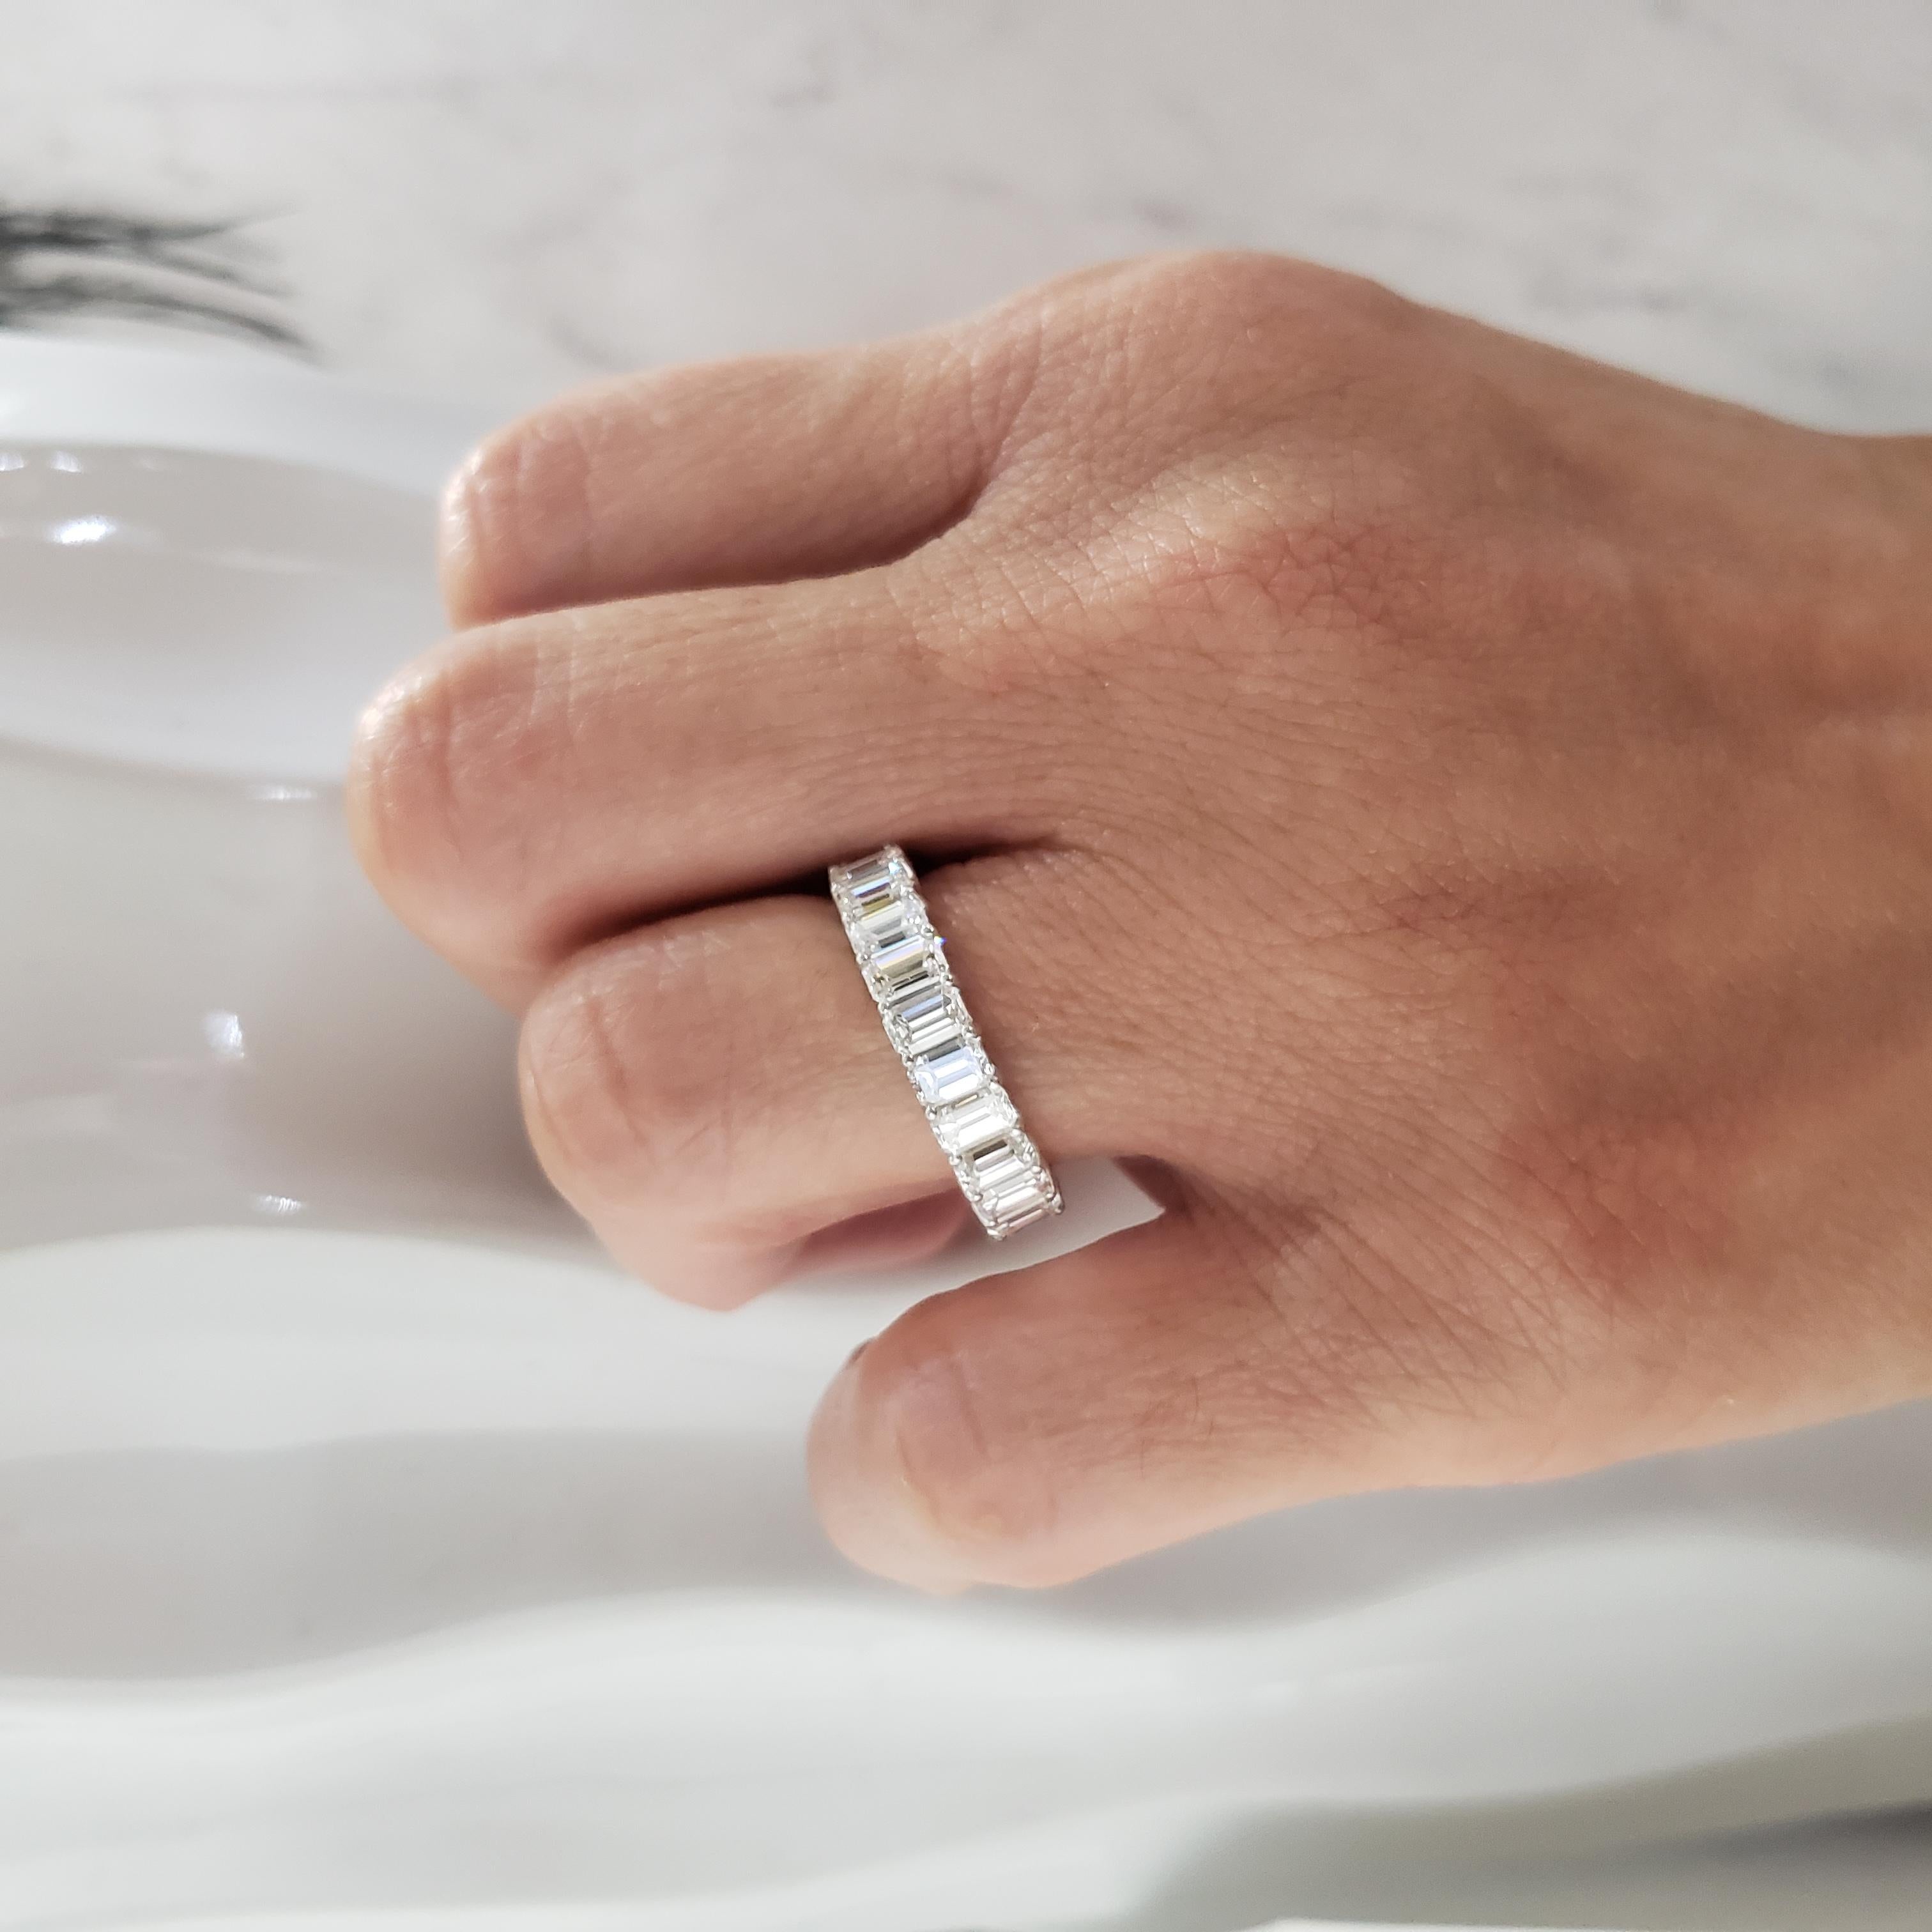 For Sale:  4 Carat Emerald Cut Eternity Band Gallery Style F-G Color VS1 Clarity Platinum 10